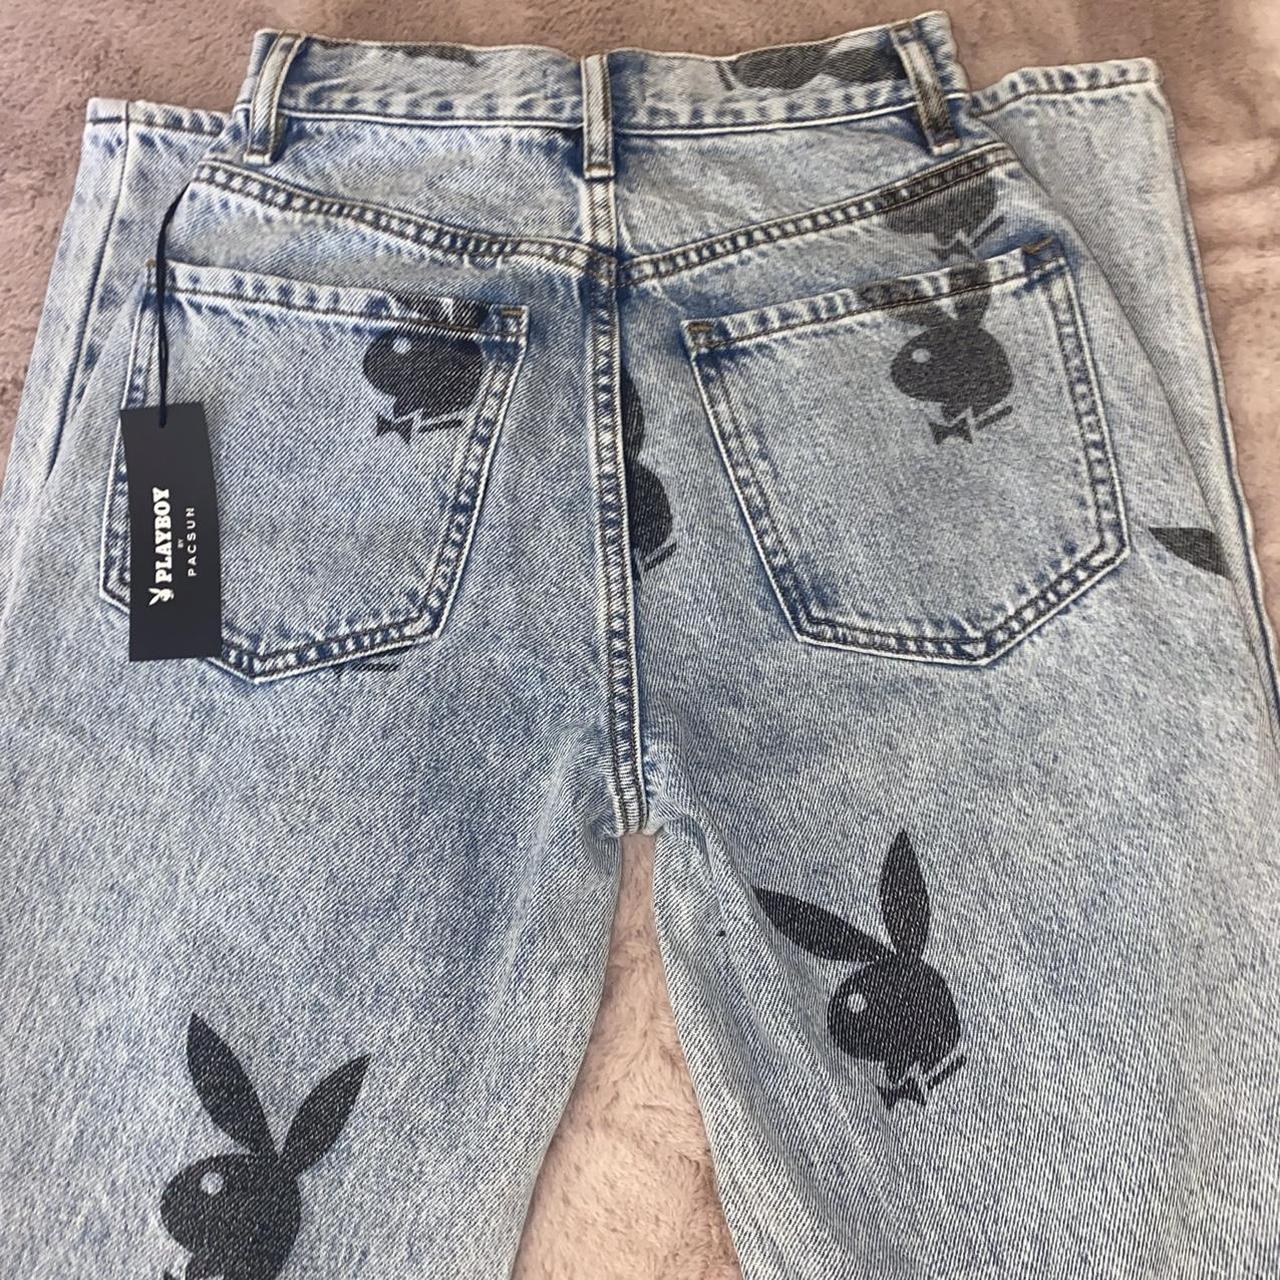 Playboy jeans Brand new with tags Never worn size... - Depop